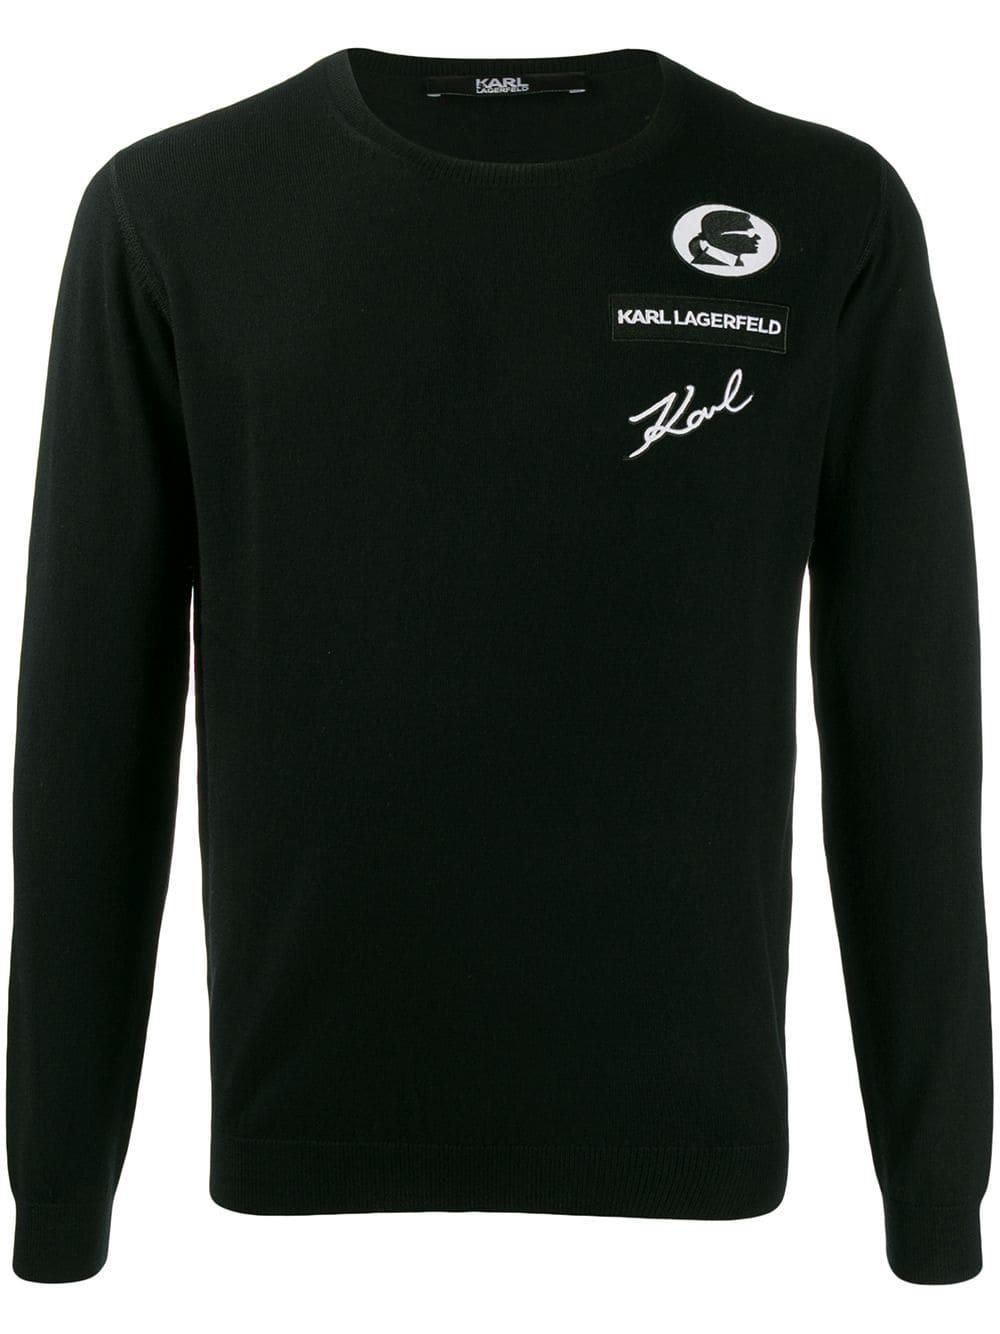 Karl Lagerfeld Wool Logo Embroidered Sweater in Black for Men - Lyst